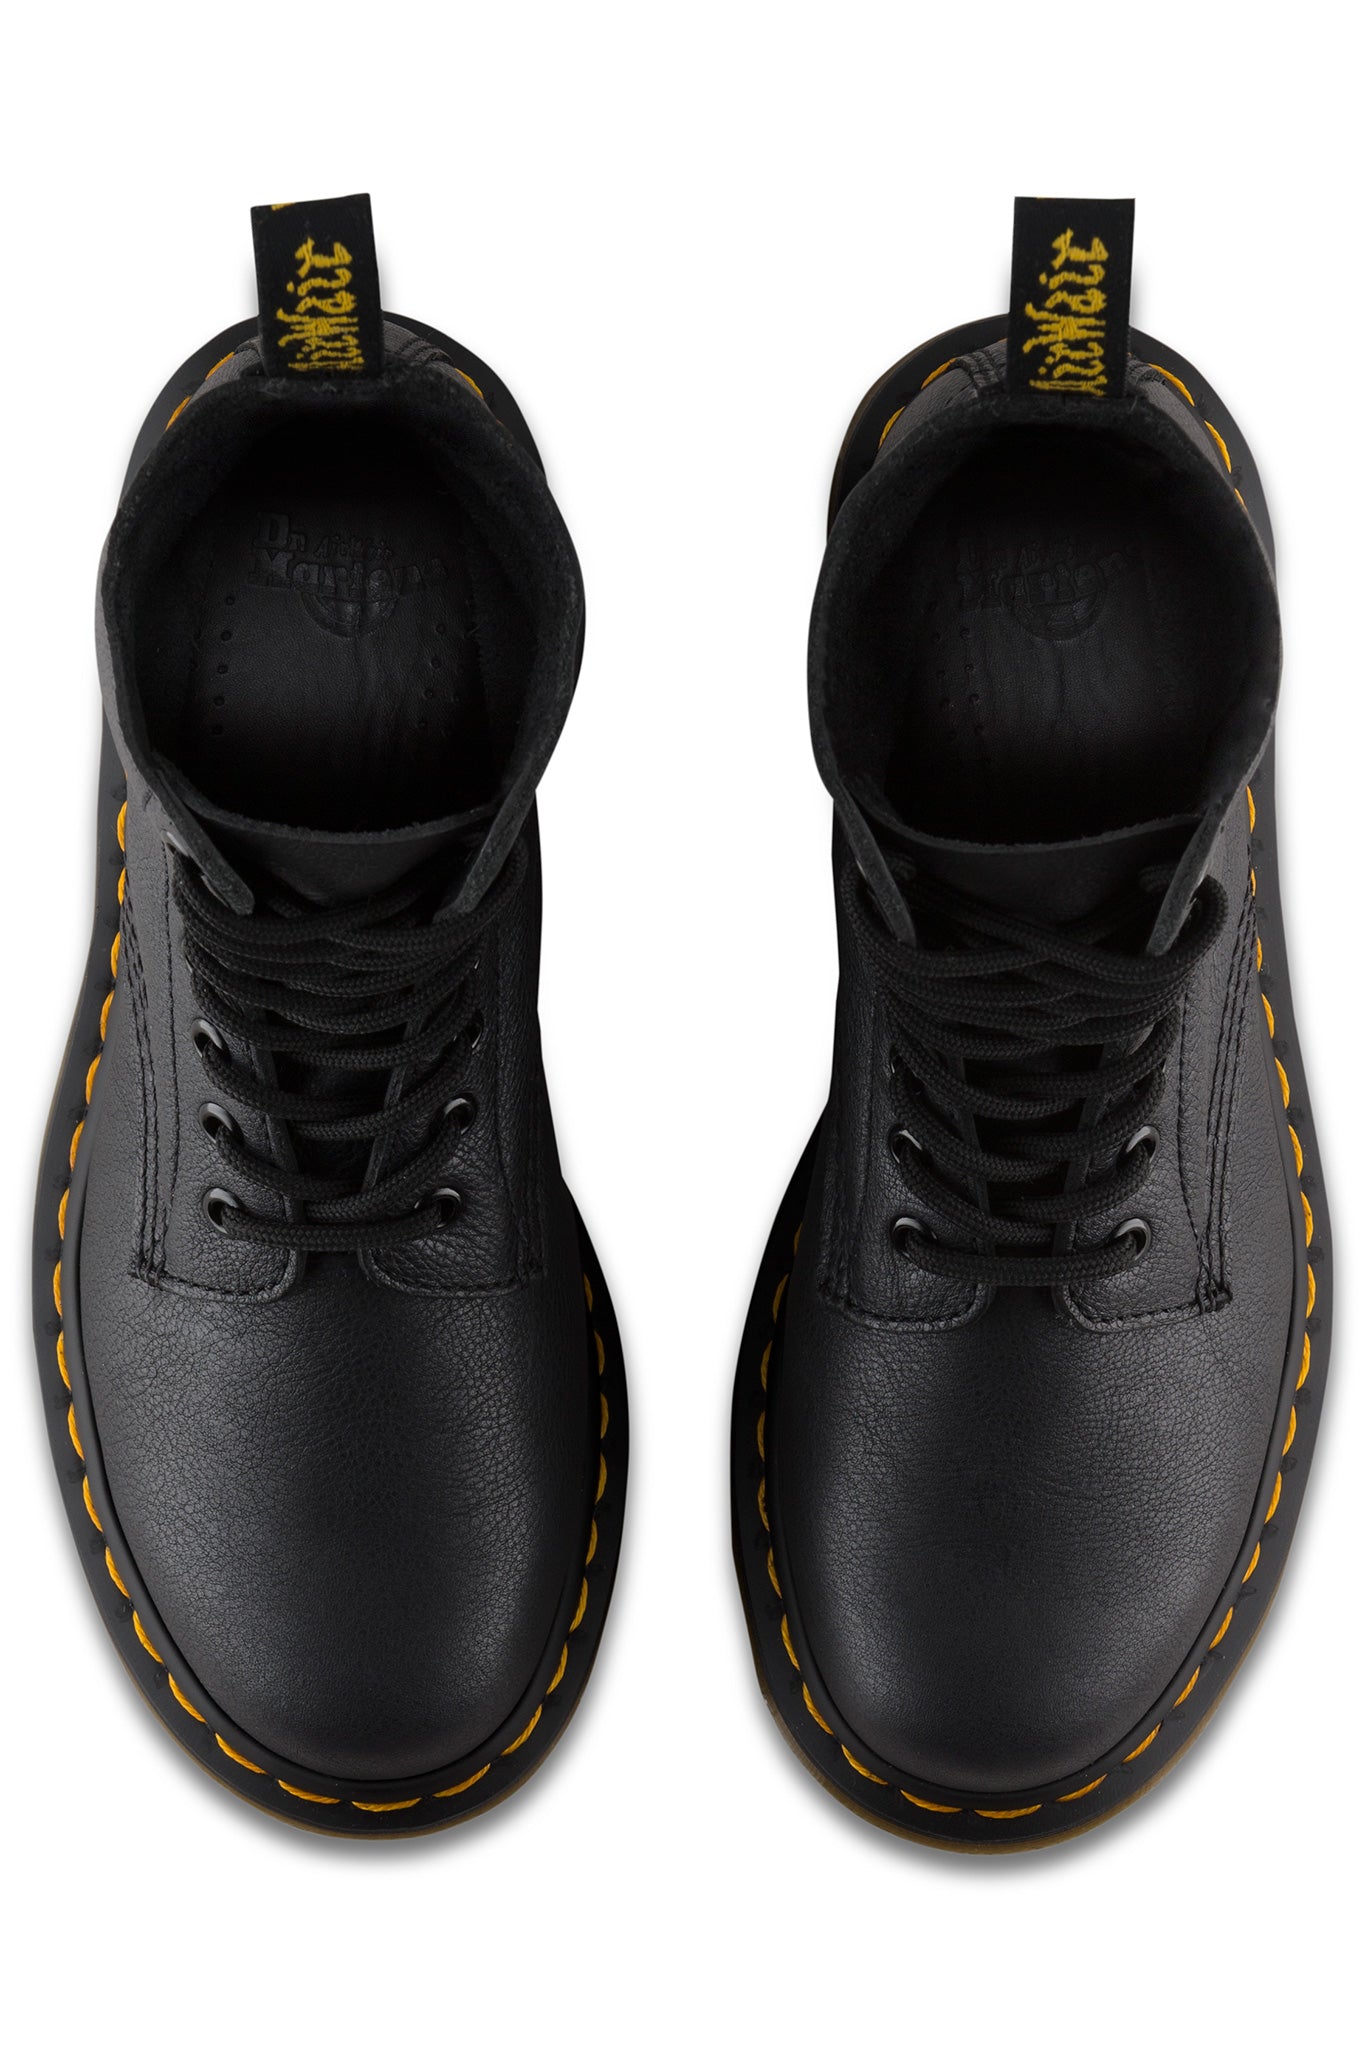 Dr Martens 1460 Pascal Virginia Leather Boot Black